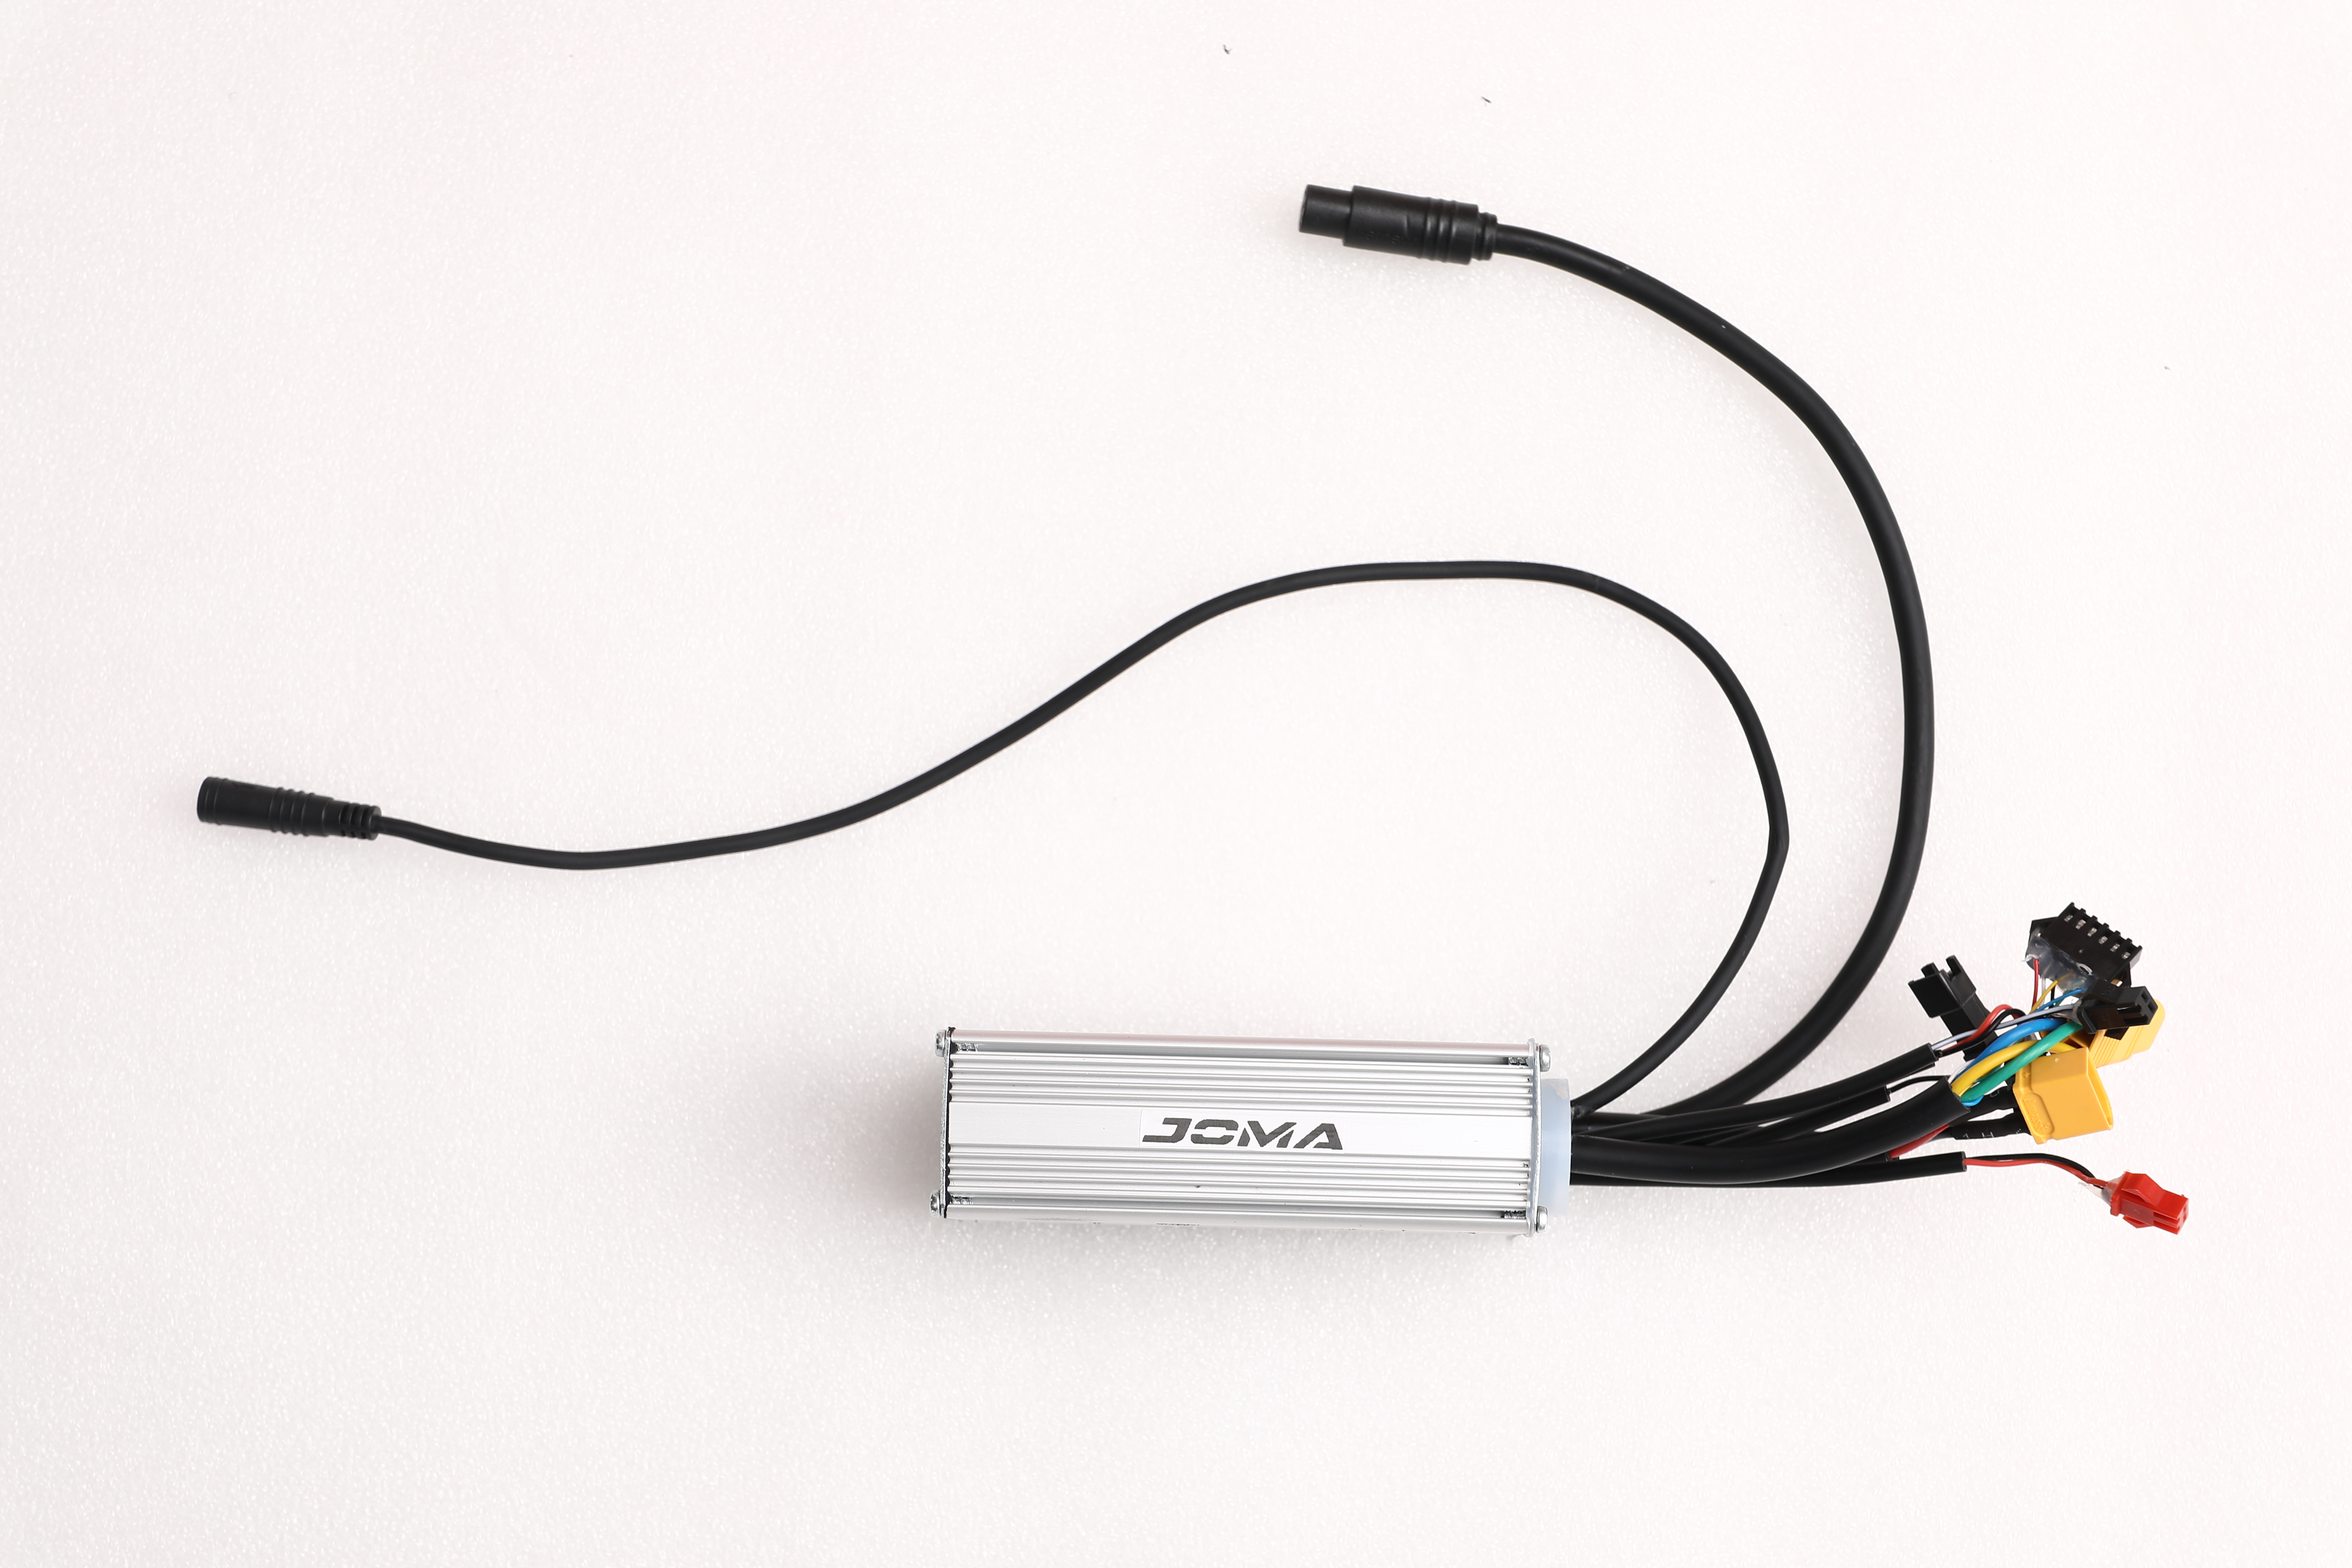 JOMA electric bike parts controller